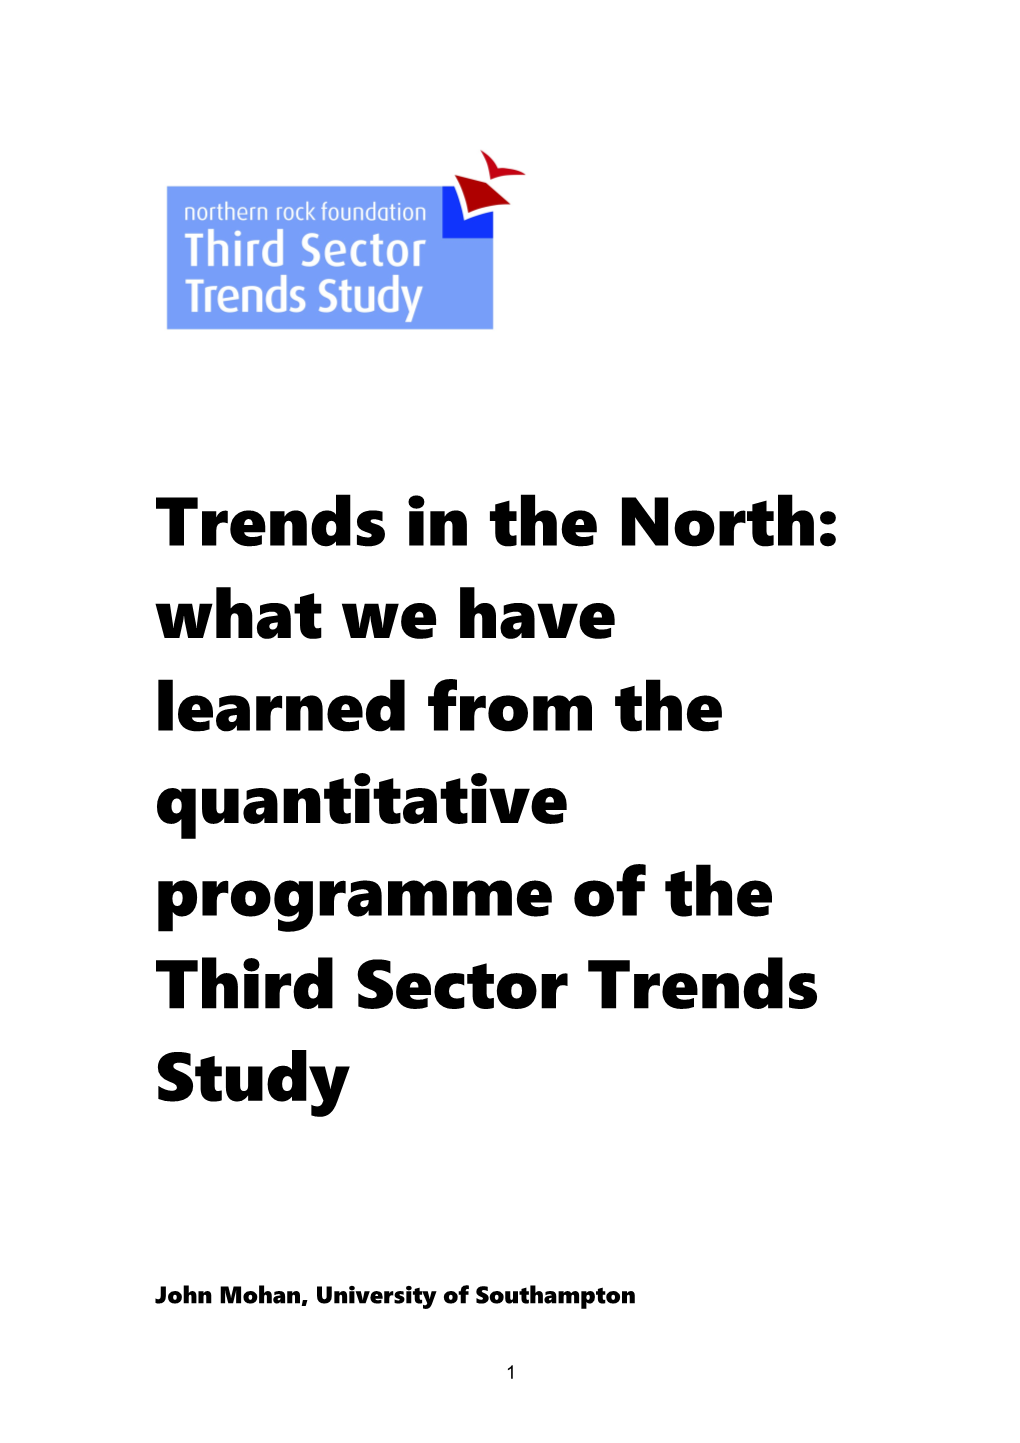 Trends in the North: What We Have Learned from the Quantitative Programme of the Third